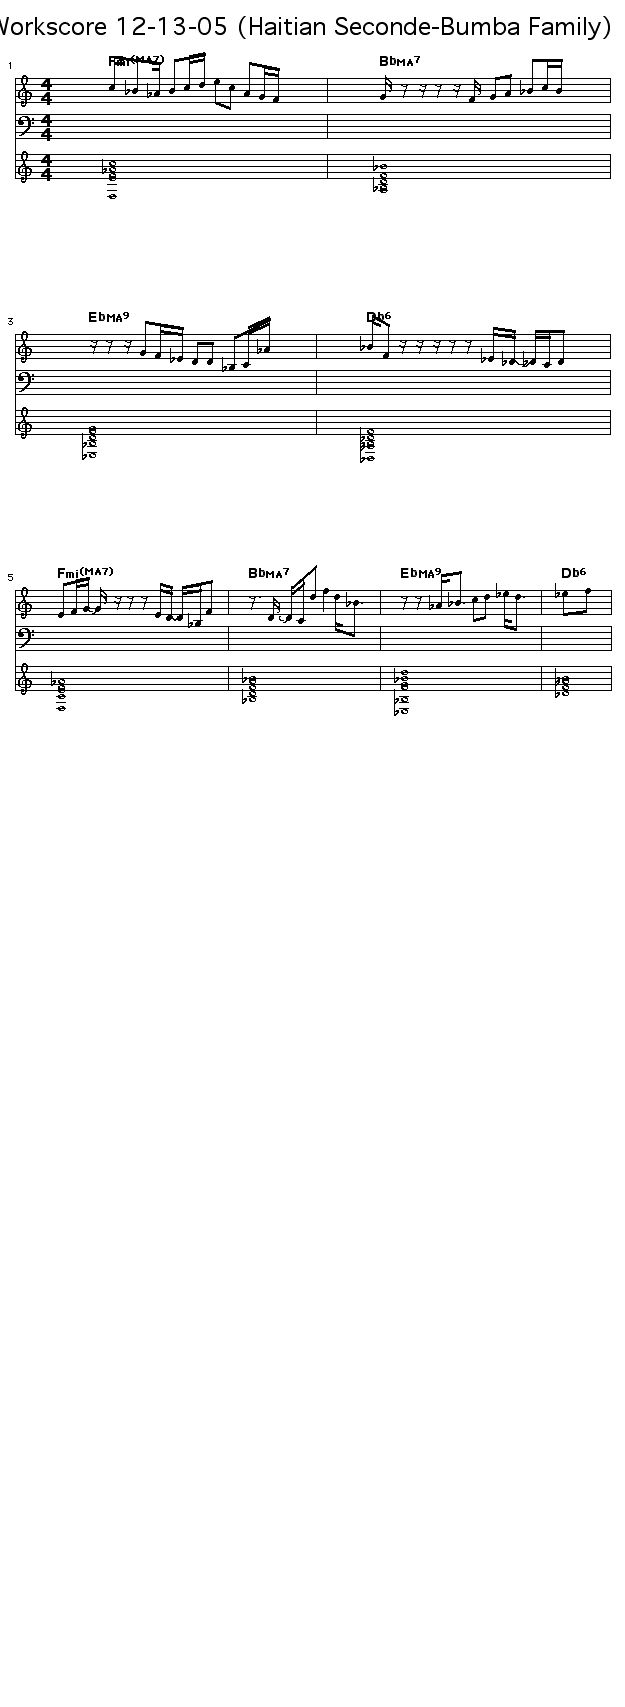 Workscore 12-13-05 (Haitian Ibo Seconde-Bumba Family): This was composed in 25 minutes using the soon to be released SongTrellis Composer. The rhythm for the first four bars was invented using the Haitian Ibo Seconde rhythm pattern. The last four bar rhythm is derived from the different patterns of the Bumba rhythm family ( Medium, Low and High).